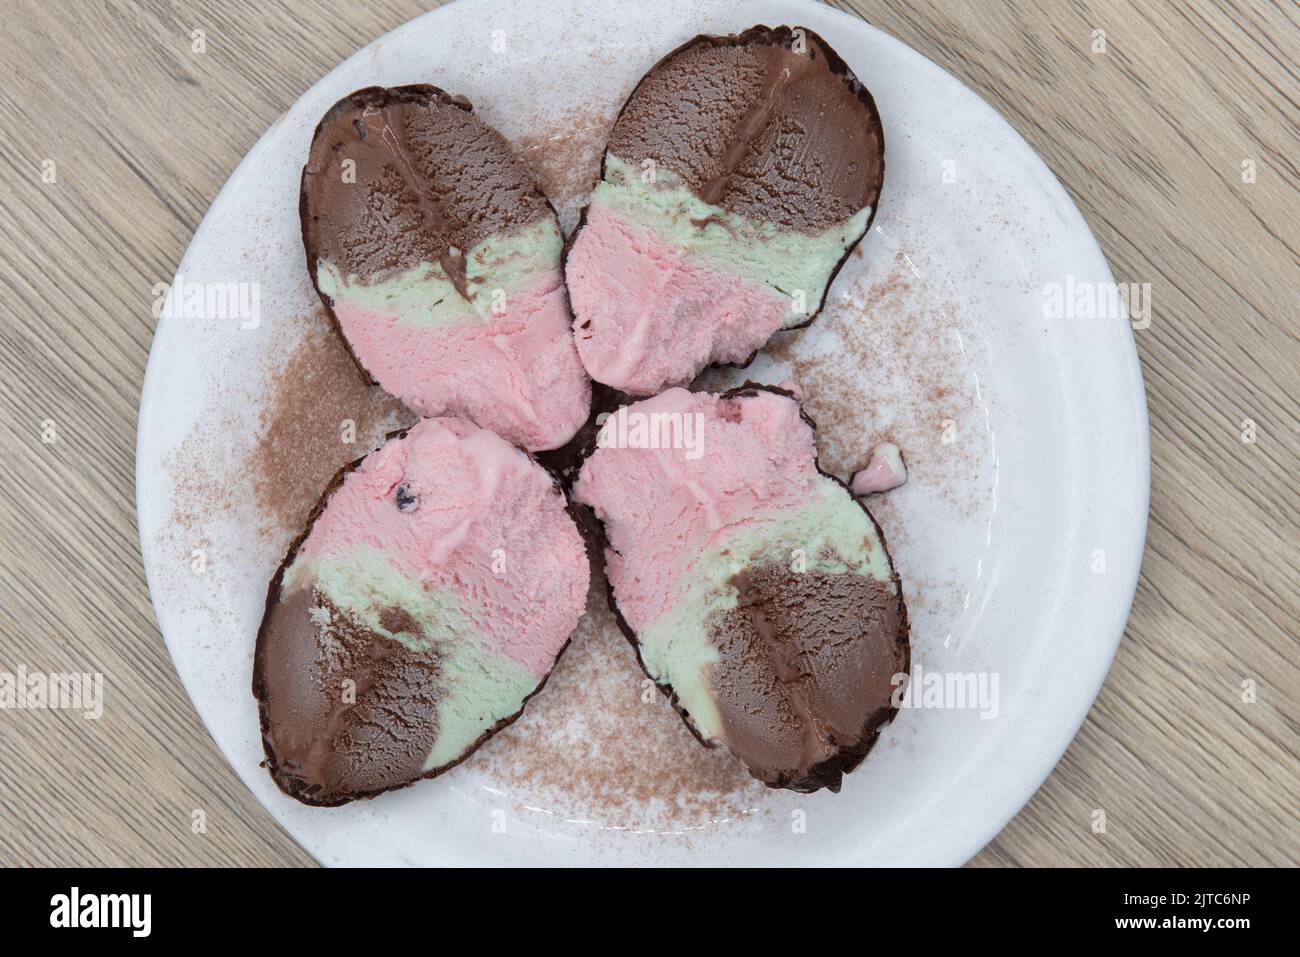 Overhead view of authentic Italian cuisine dessert of spumoni cut into quarters and presented beautifully on a garnished plate. Stock Photo